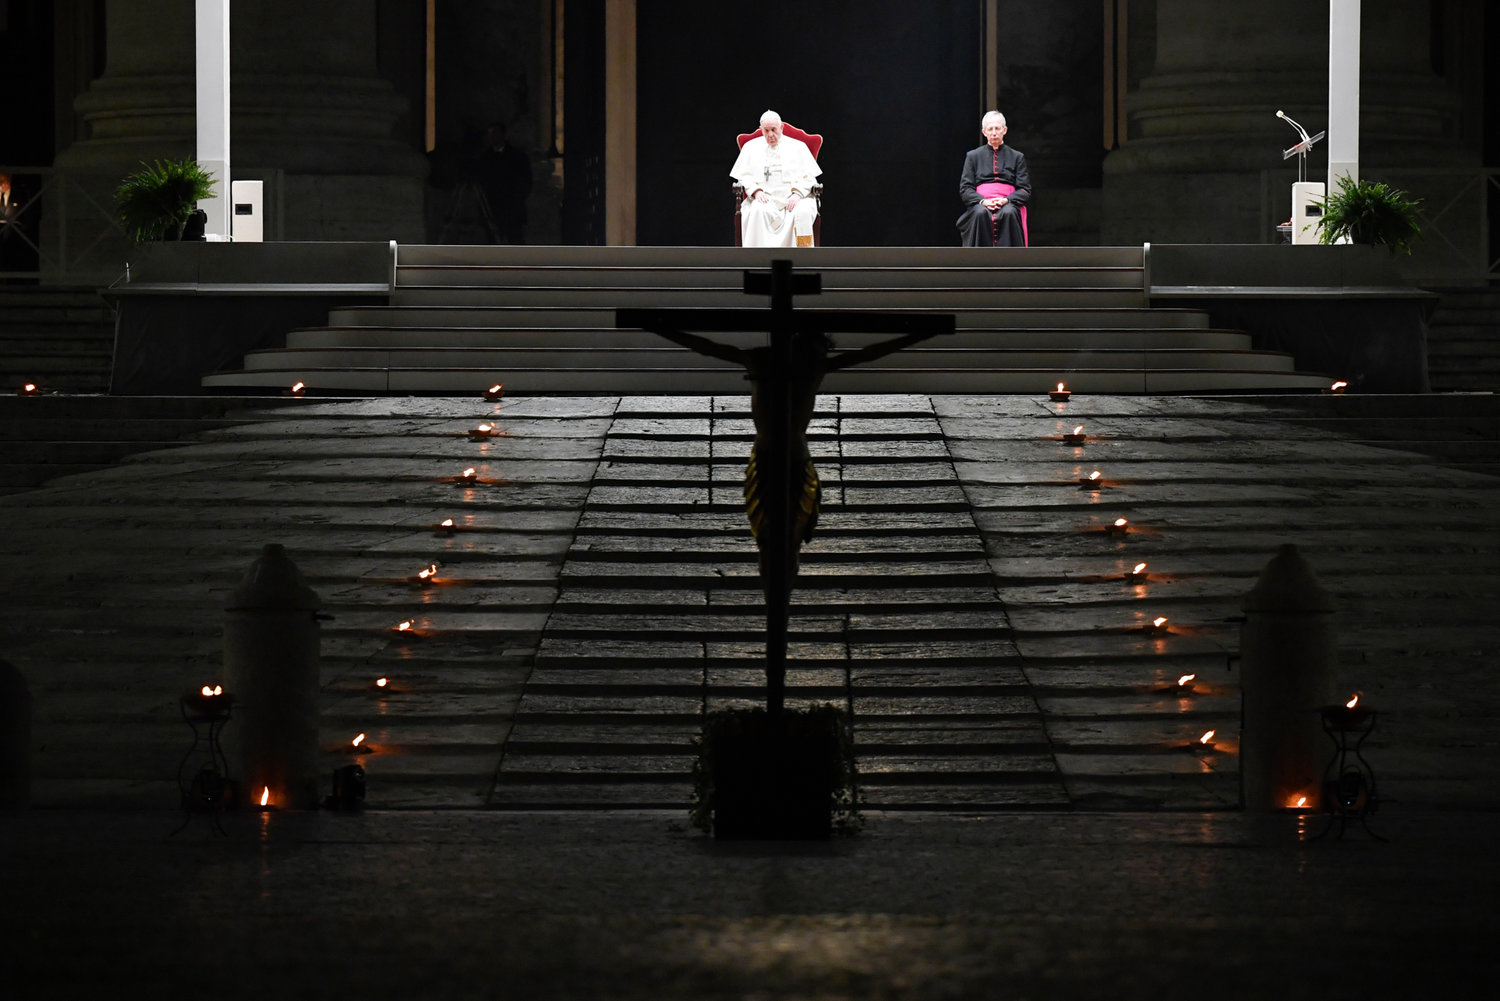 Pope Francis leads the Via Crucis procession in St. Peter’s Square at the Vatican April 10, 2020. The Good Friday service was held with no public participation because of the COVID-19 pandemic.